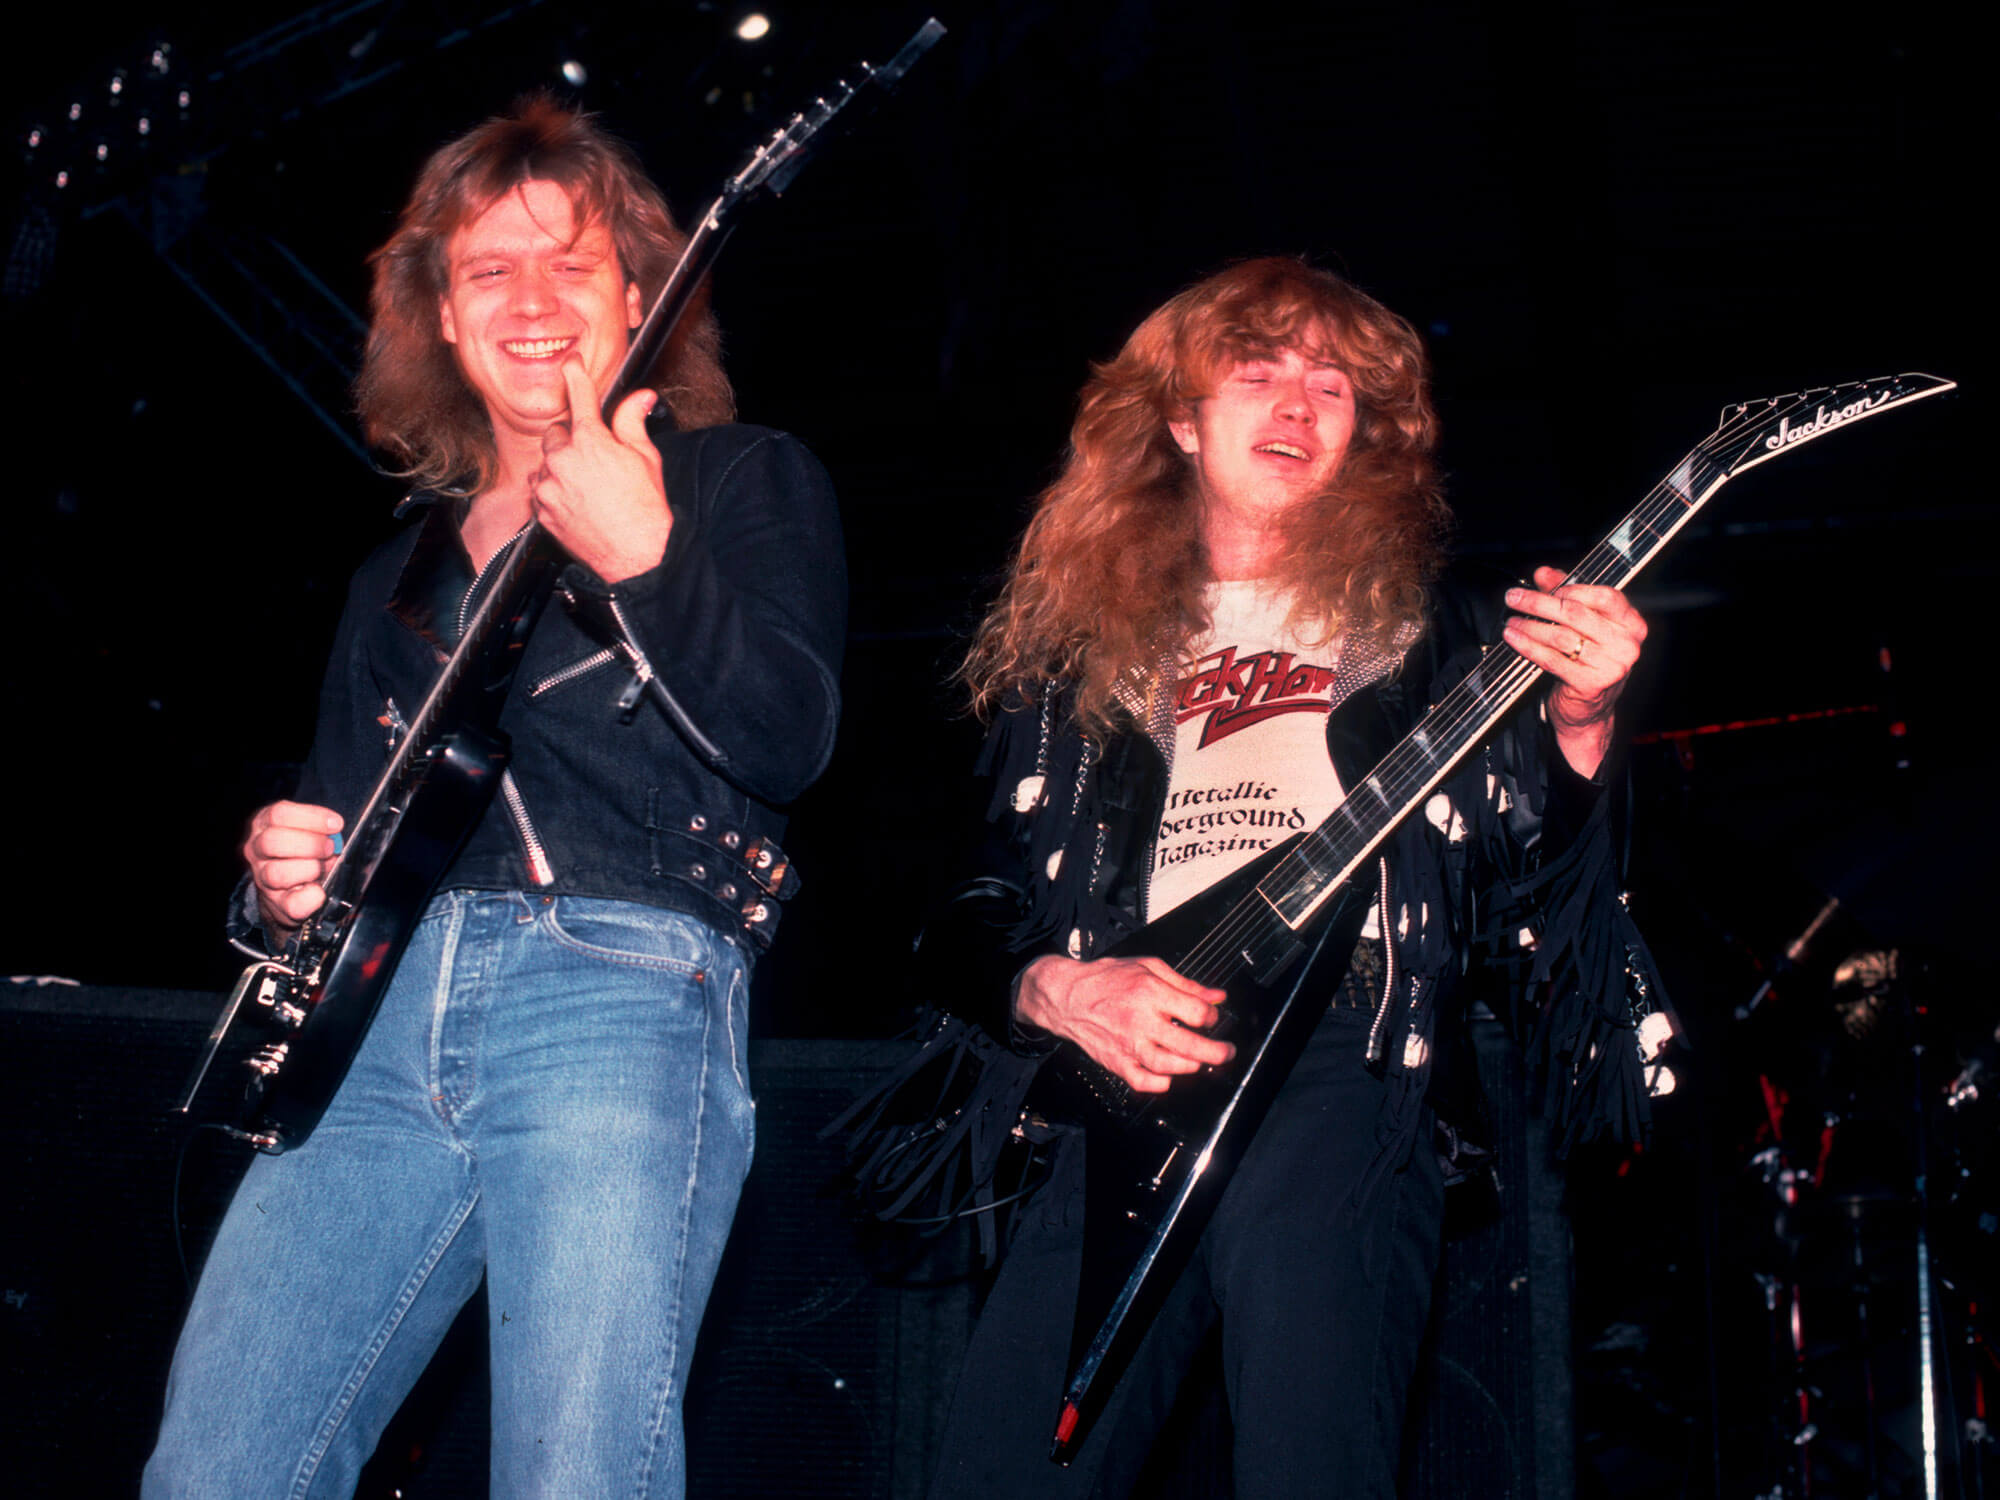 [L-R] Chris Poland and Dave Mustaine of Megadeth